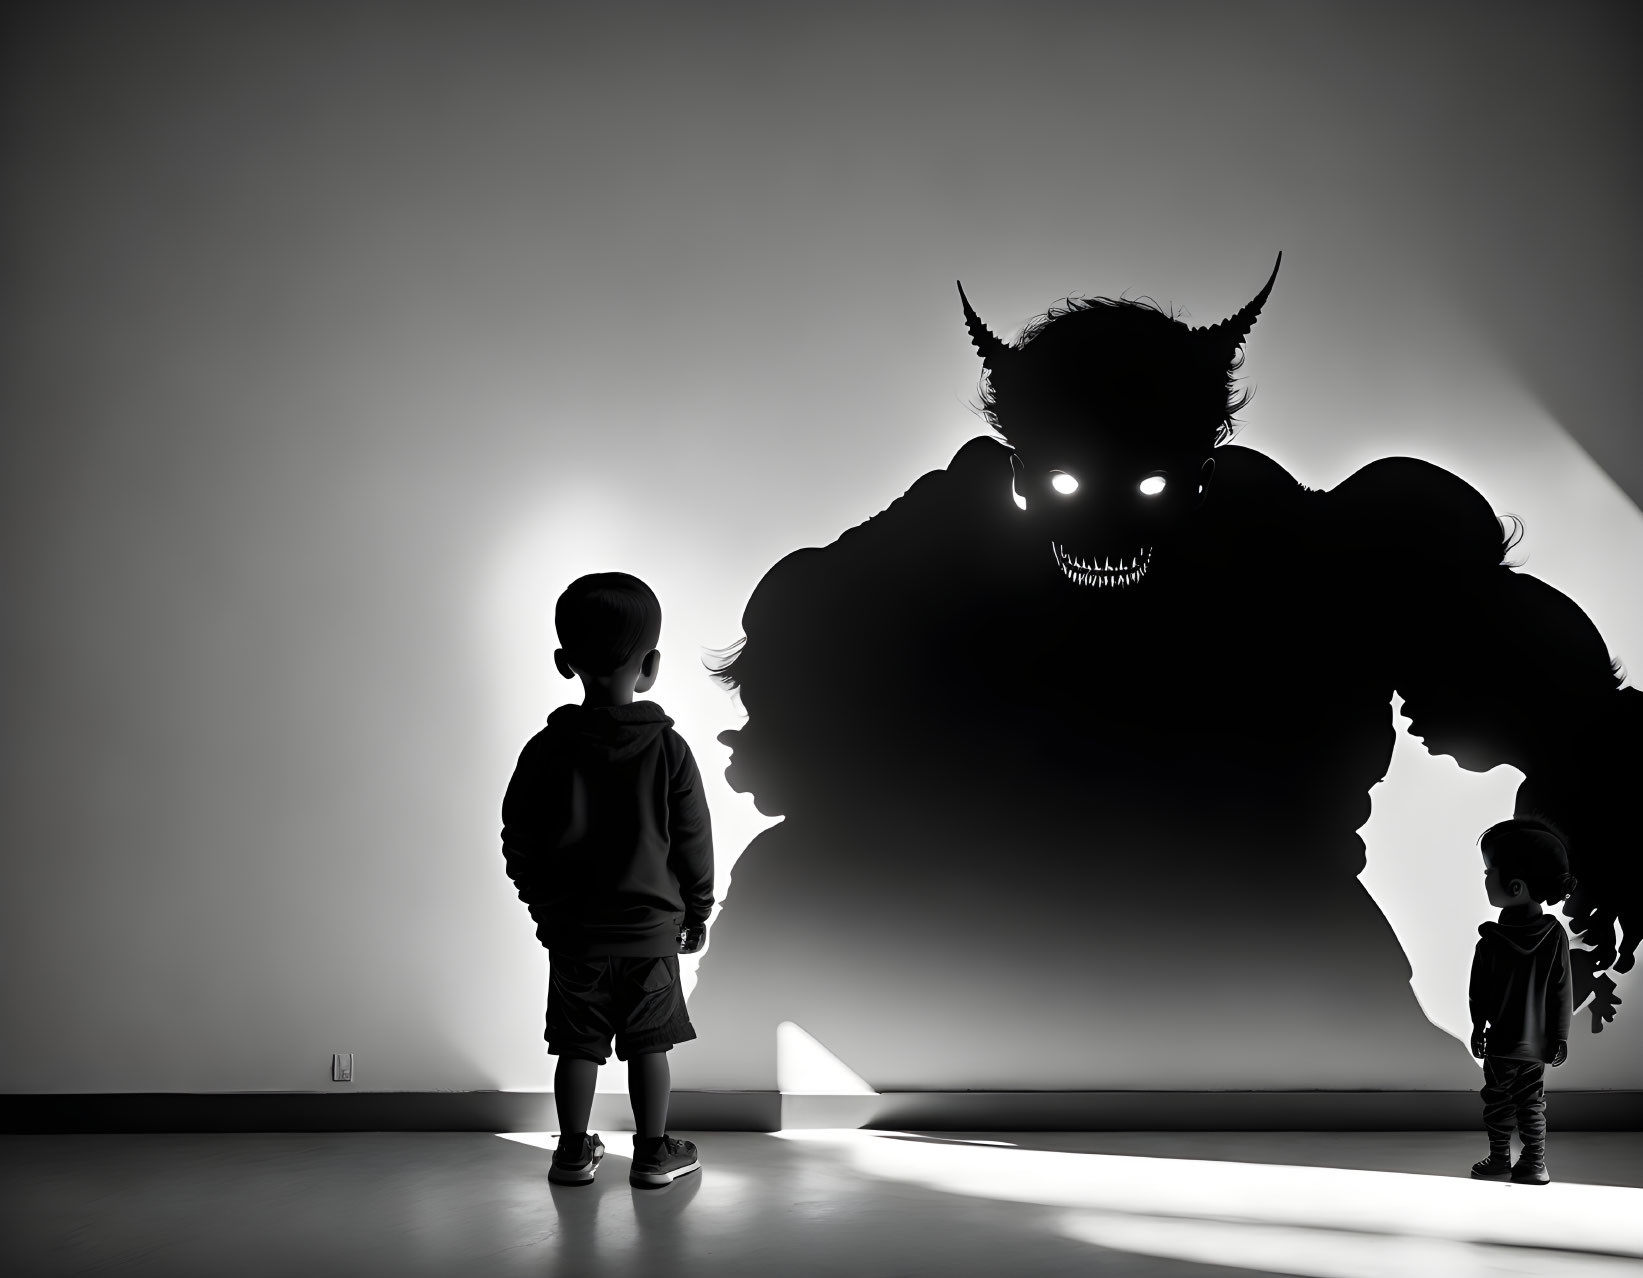 Children casting shadow of monster in room with light source on right